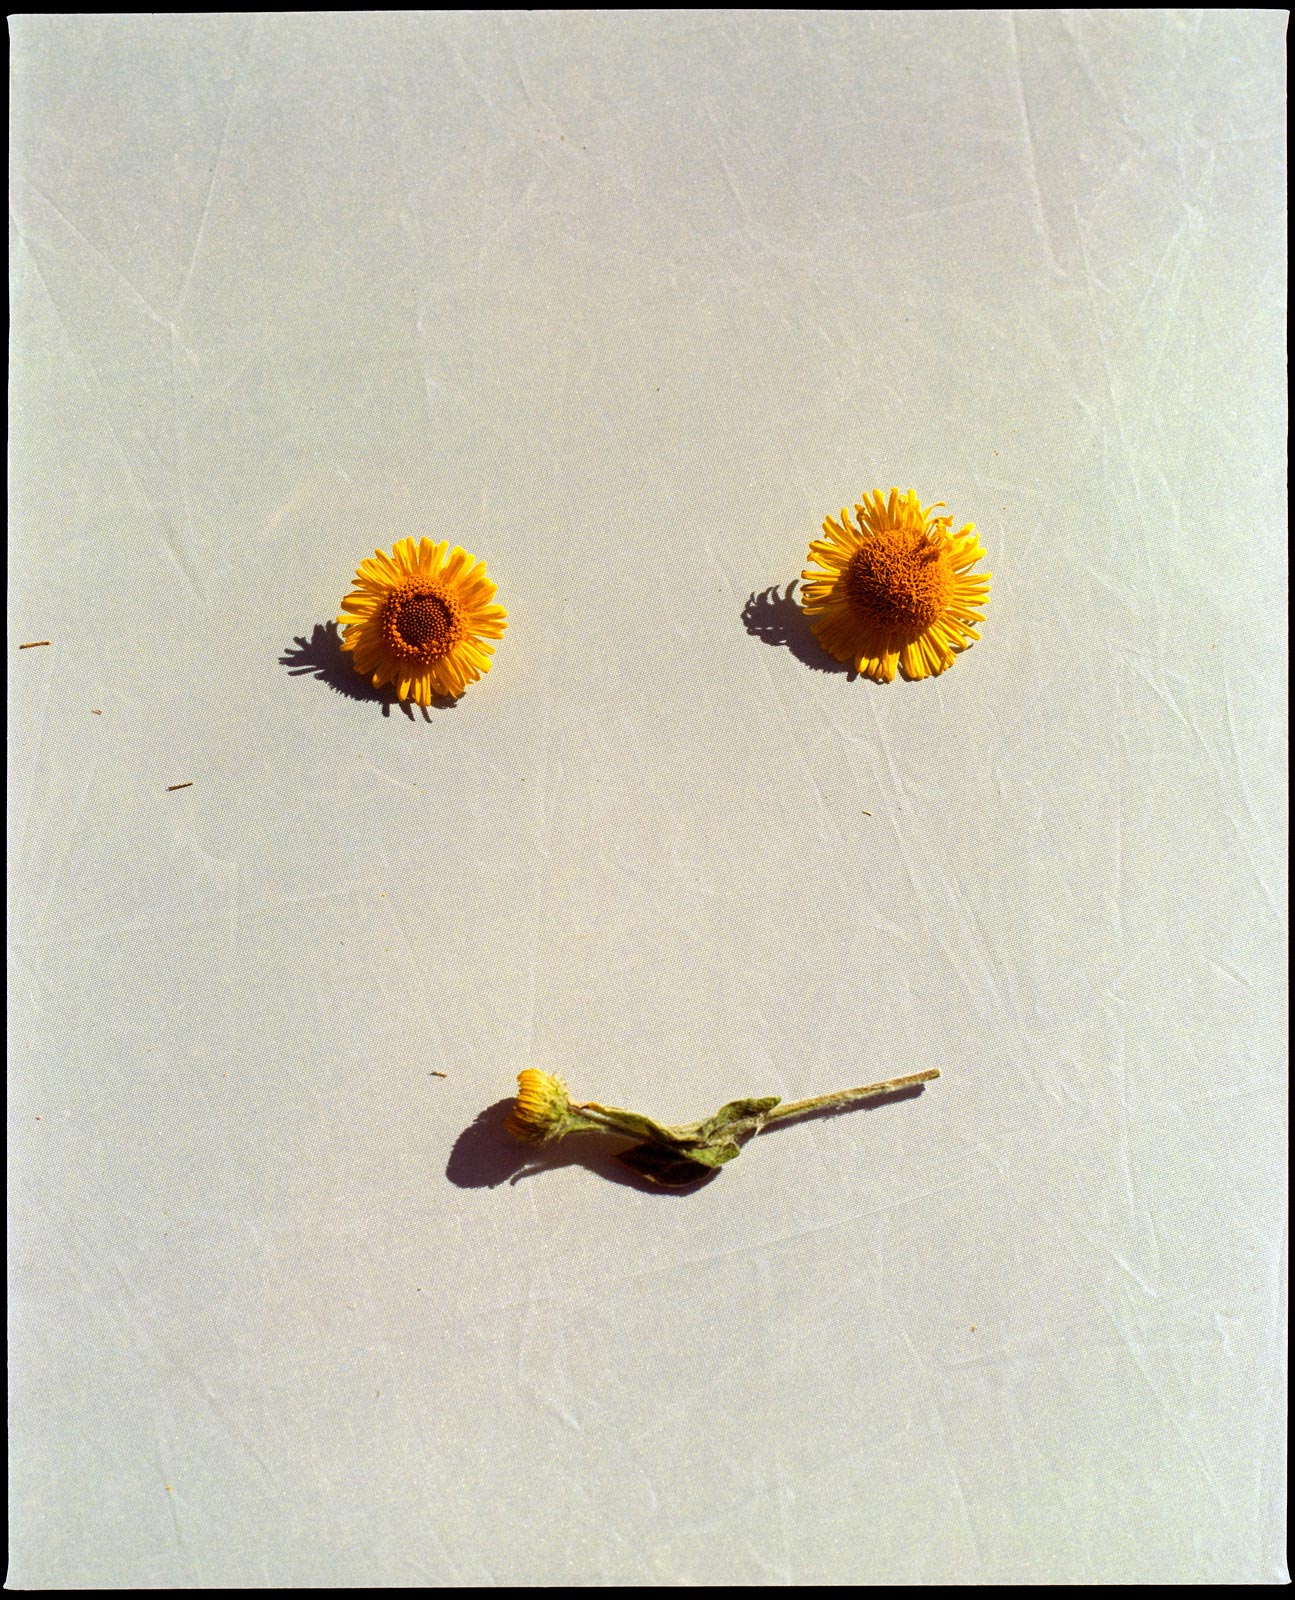 Smiley face, artistic flower photo of a gerbera daisy, analogue photography.